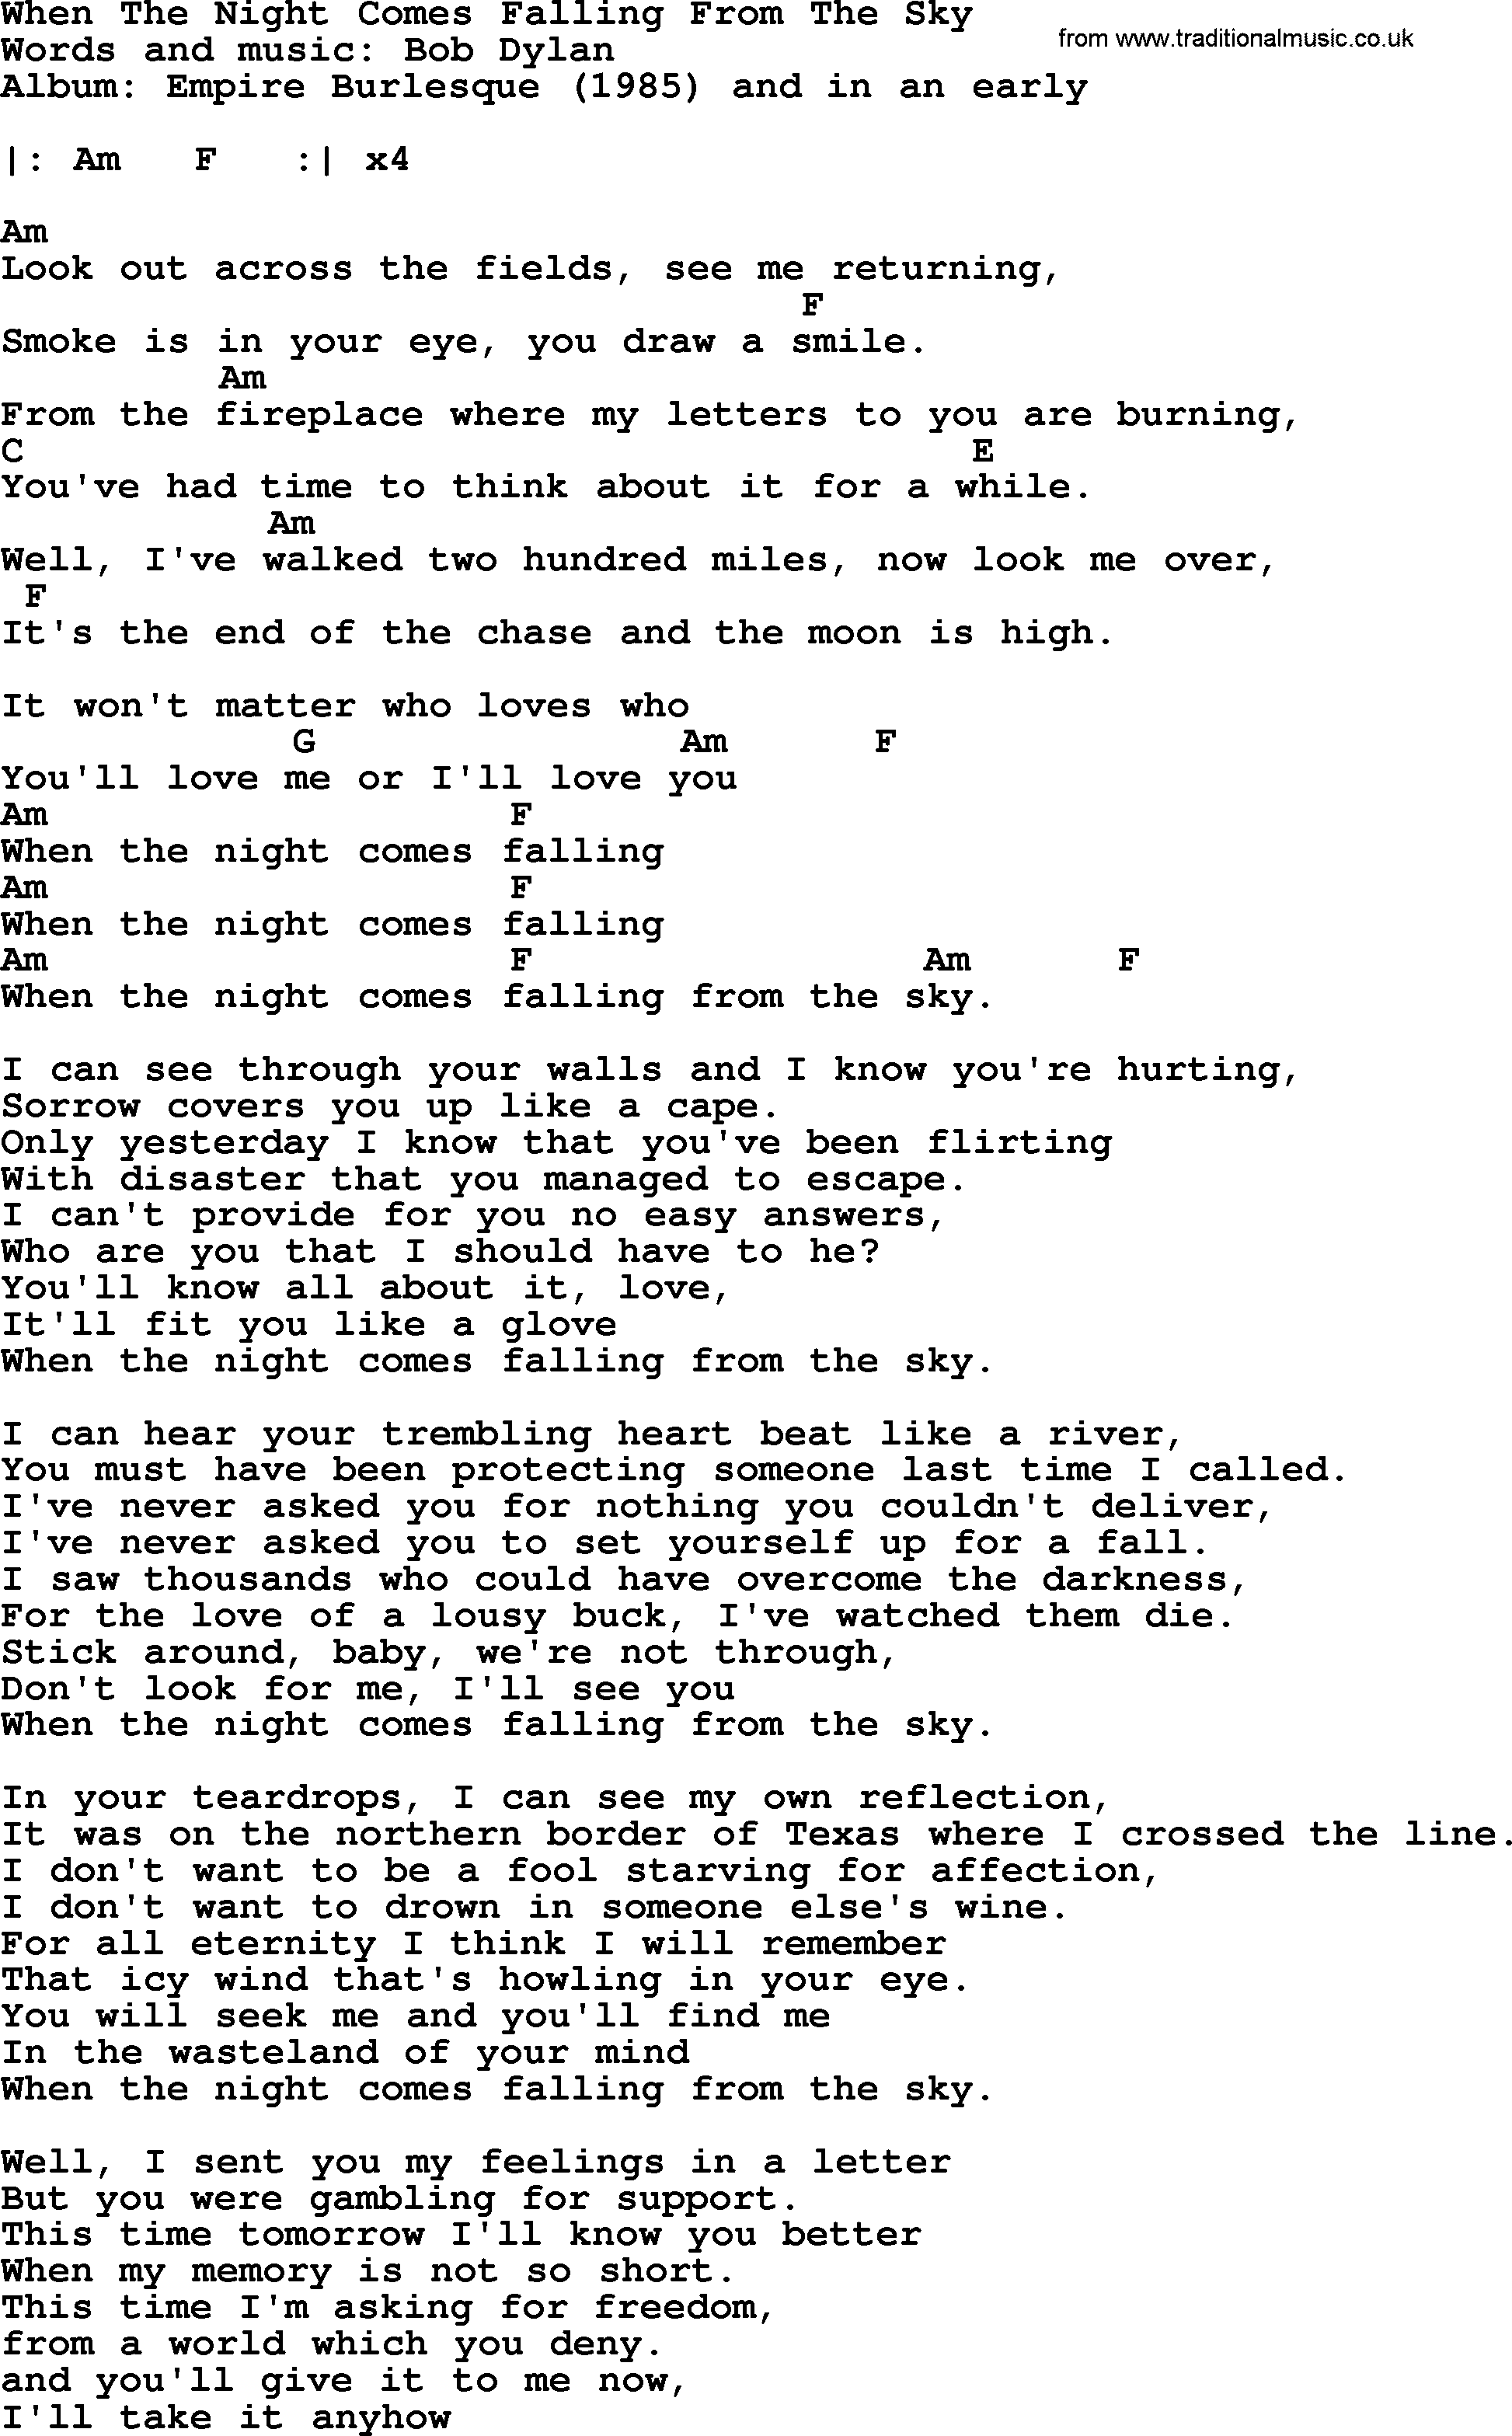 Bob Dylan song, lyrics with chords - When The Night Comes Falling From The Sky